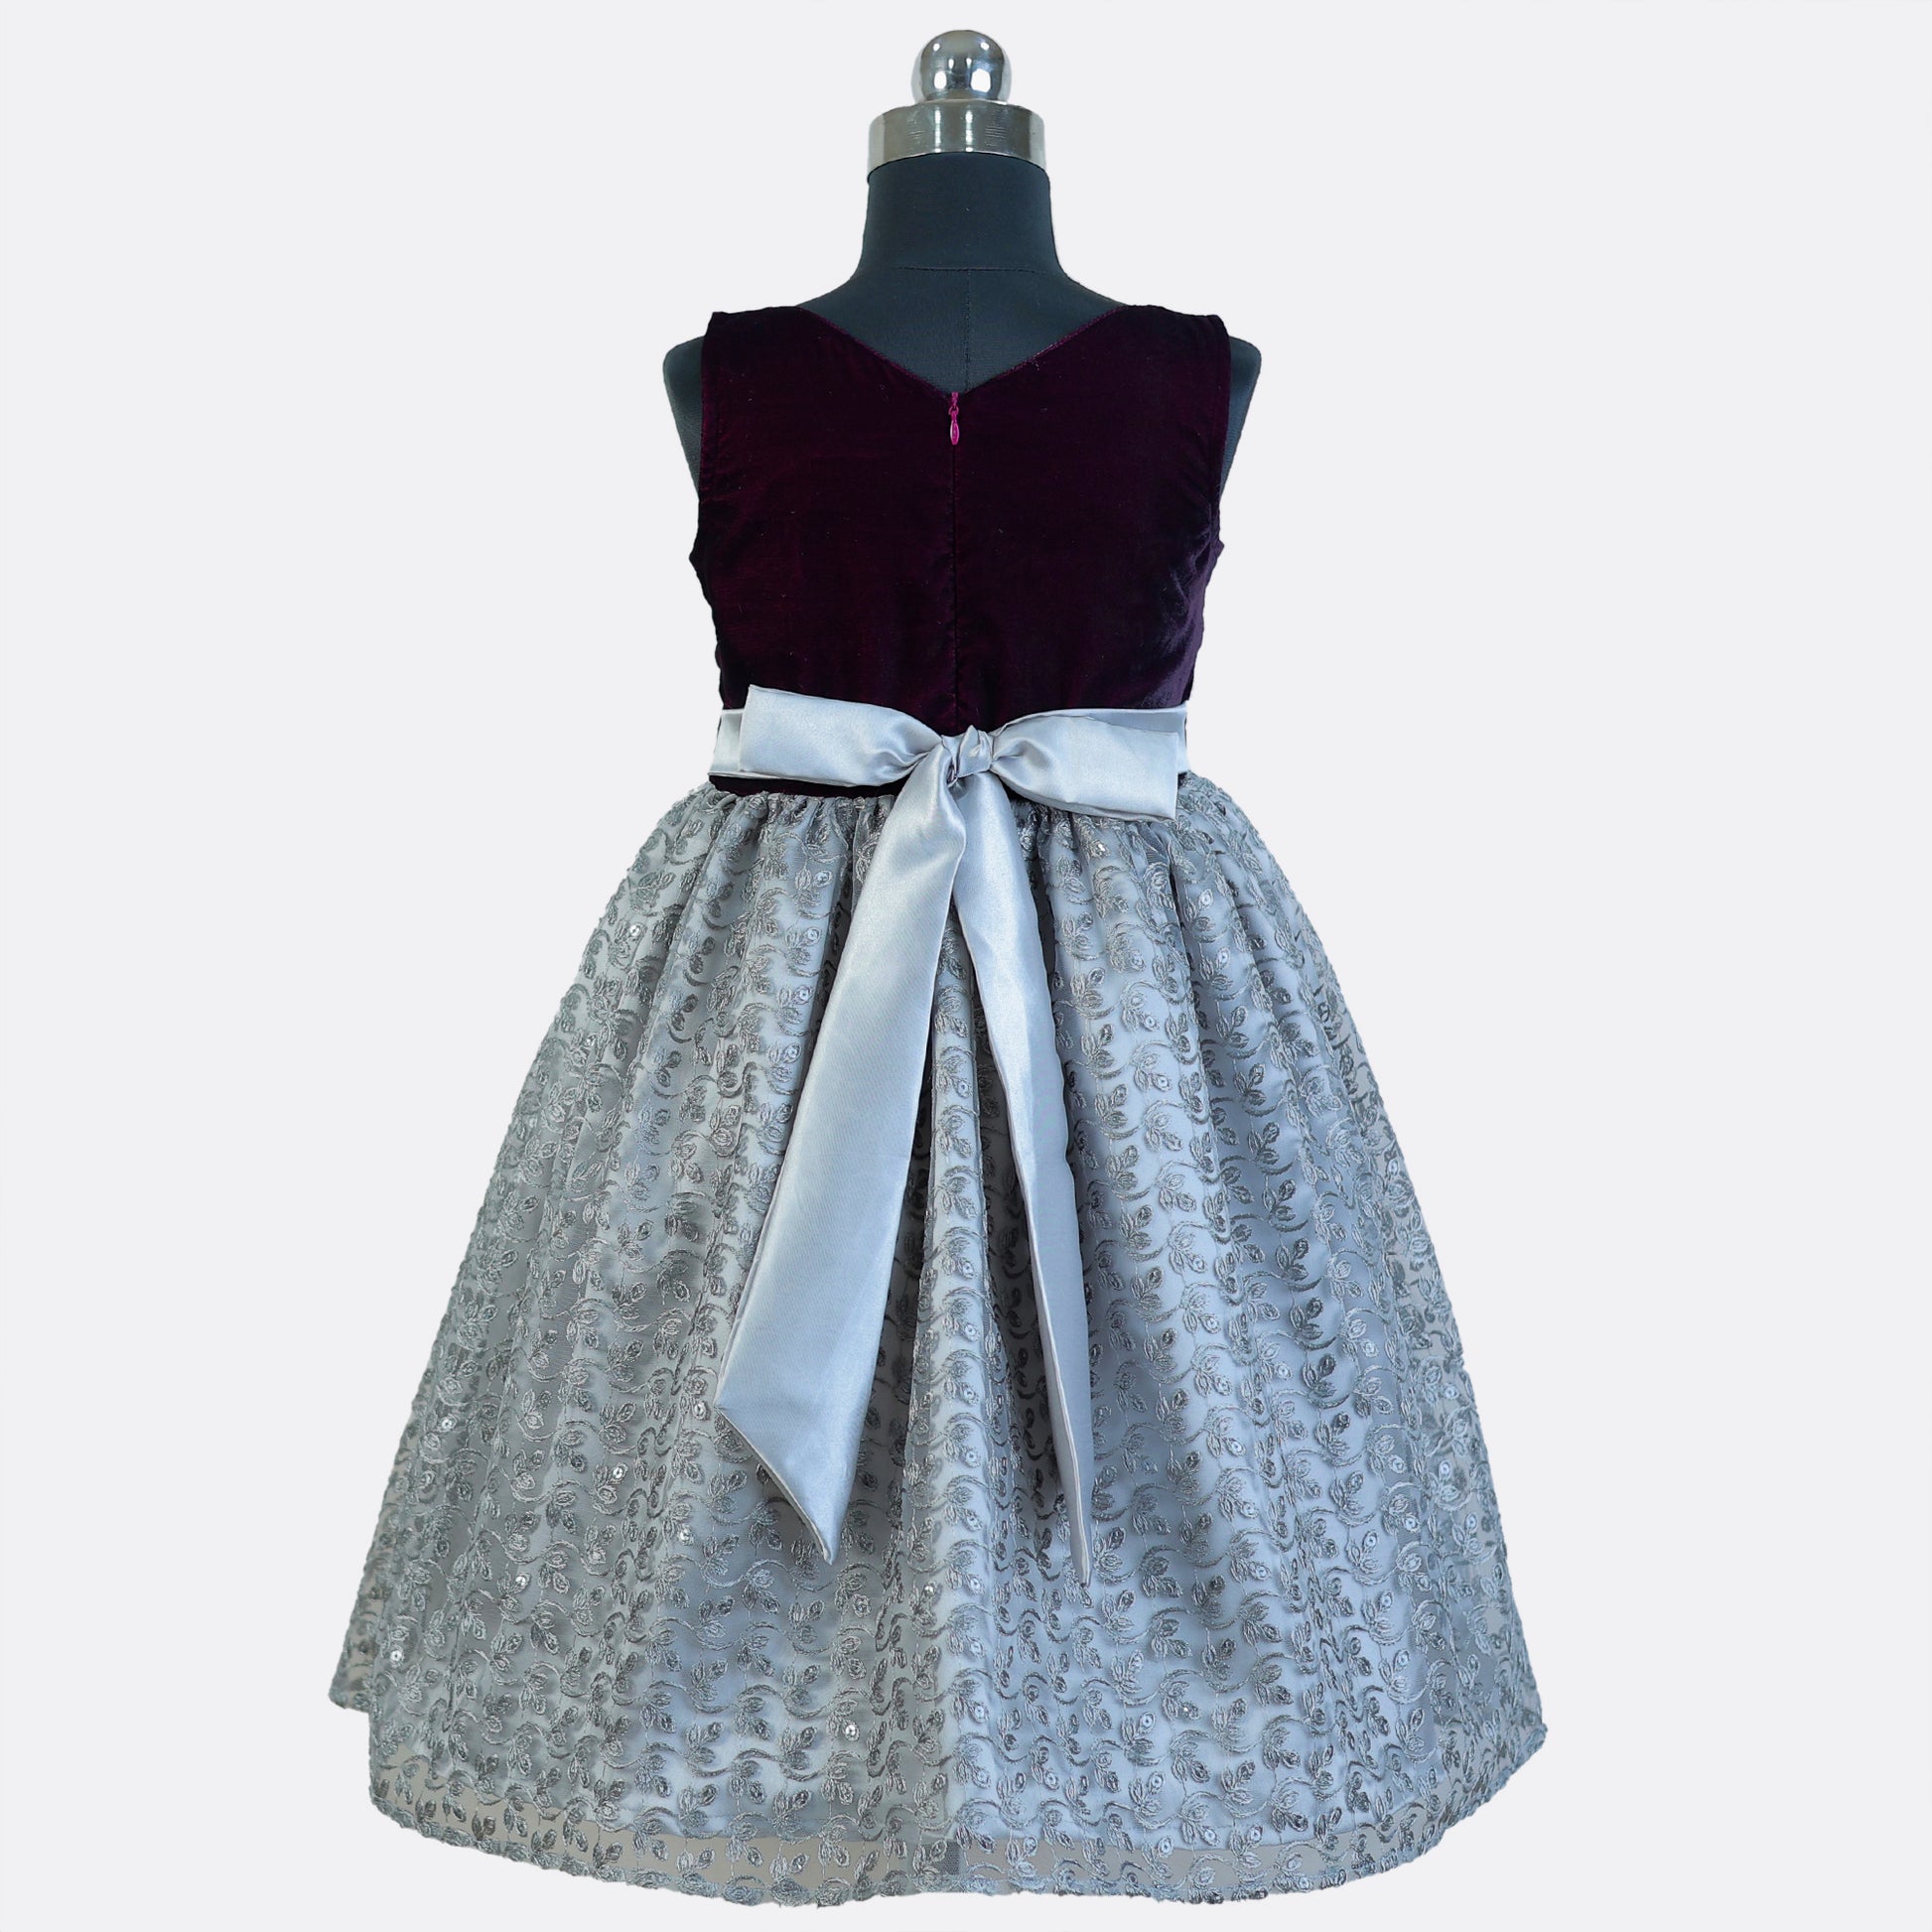 HEYKIDOO kids clothing latest designer dresses girls stylish comfortable silver birthday Party frock 10 years old beautiful, elegant velvet net Embroidered purple party frock buy online shopping India